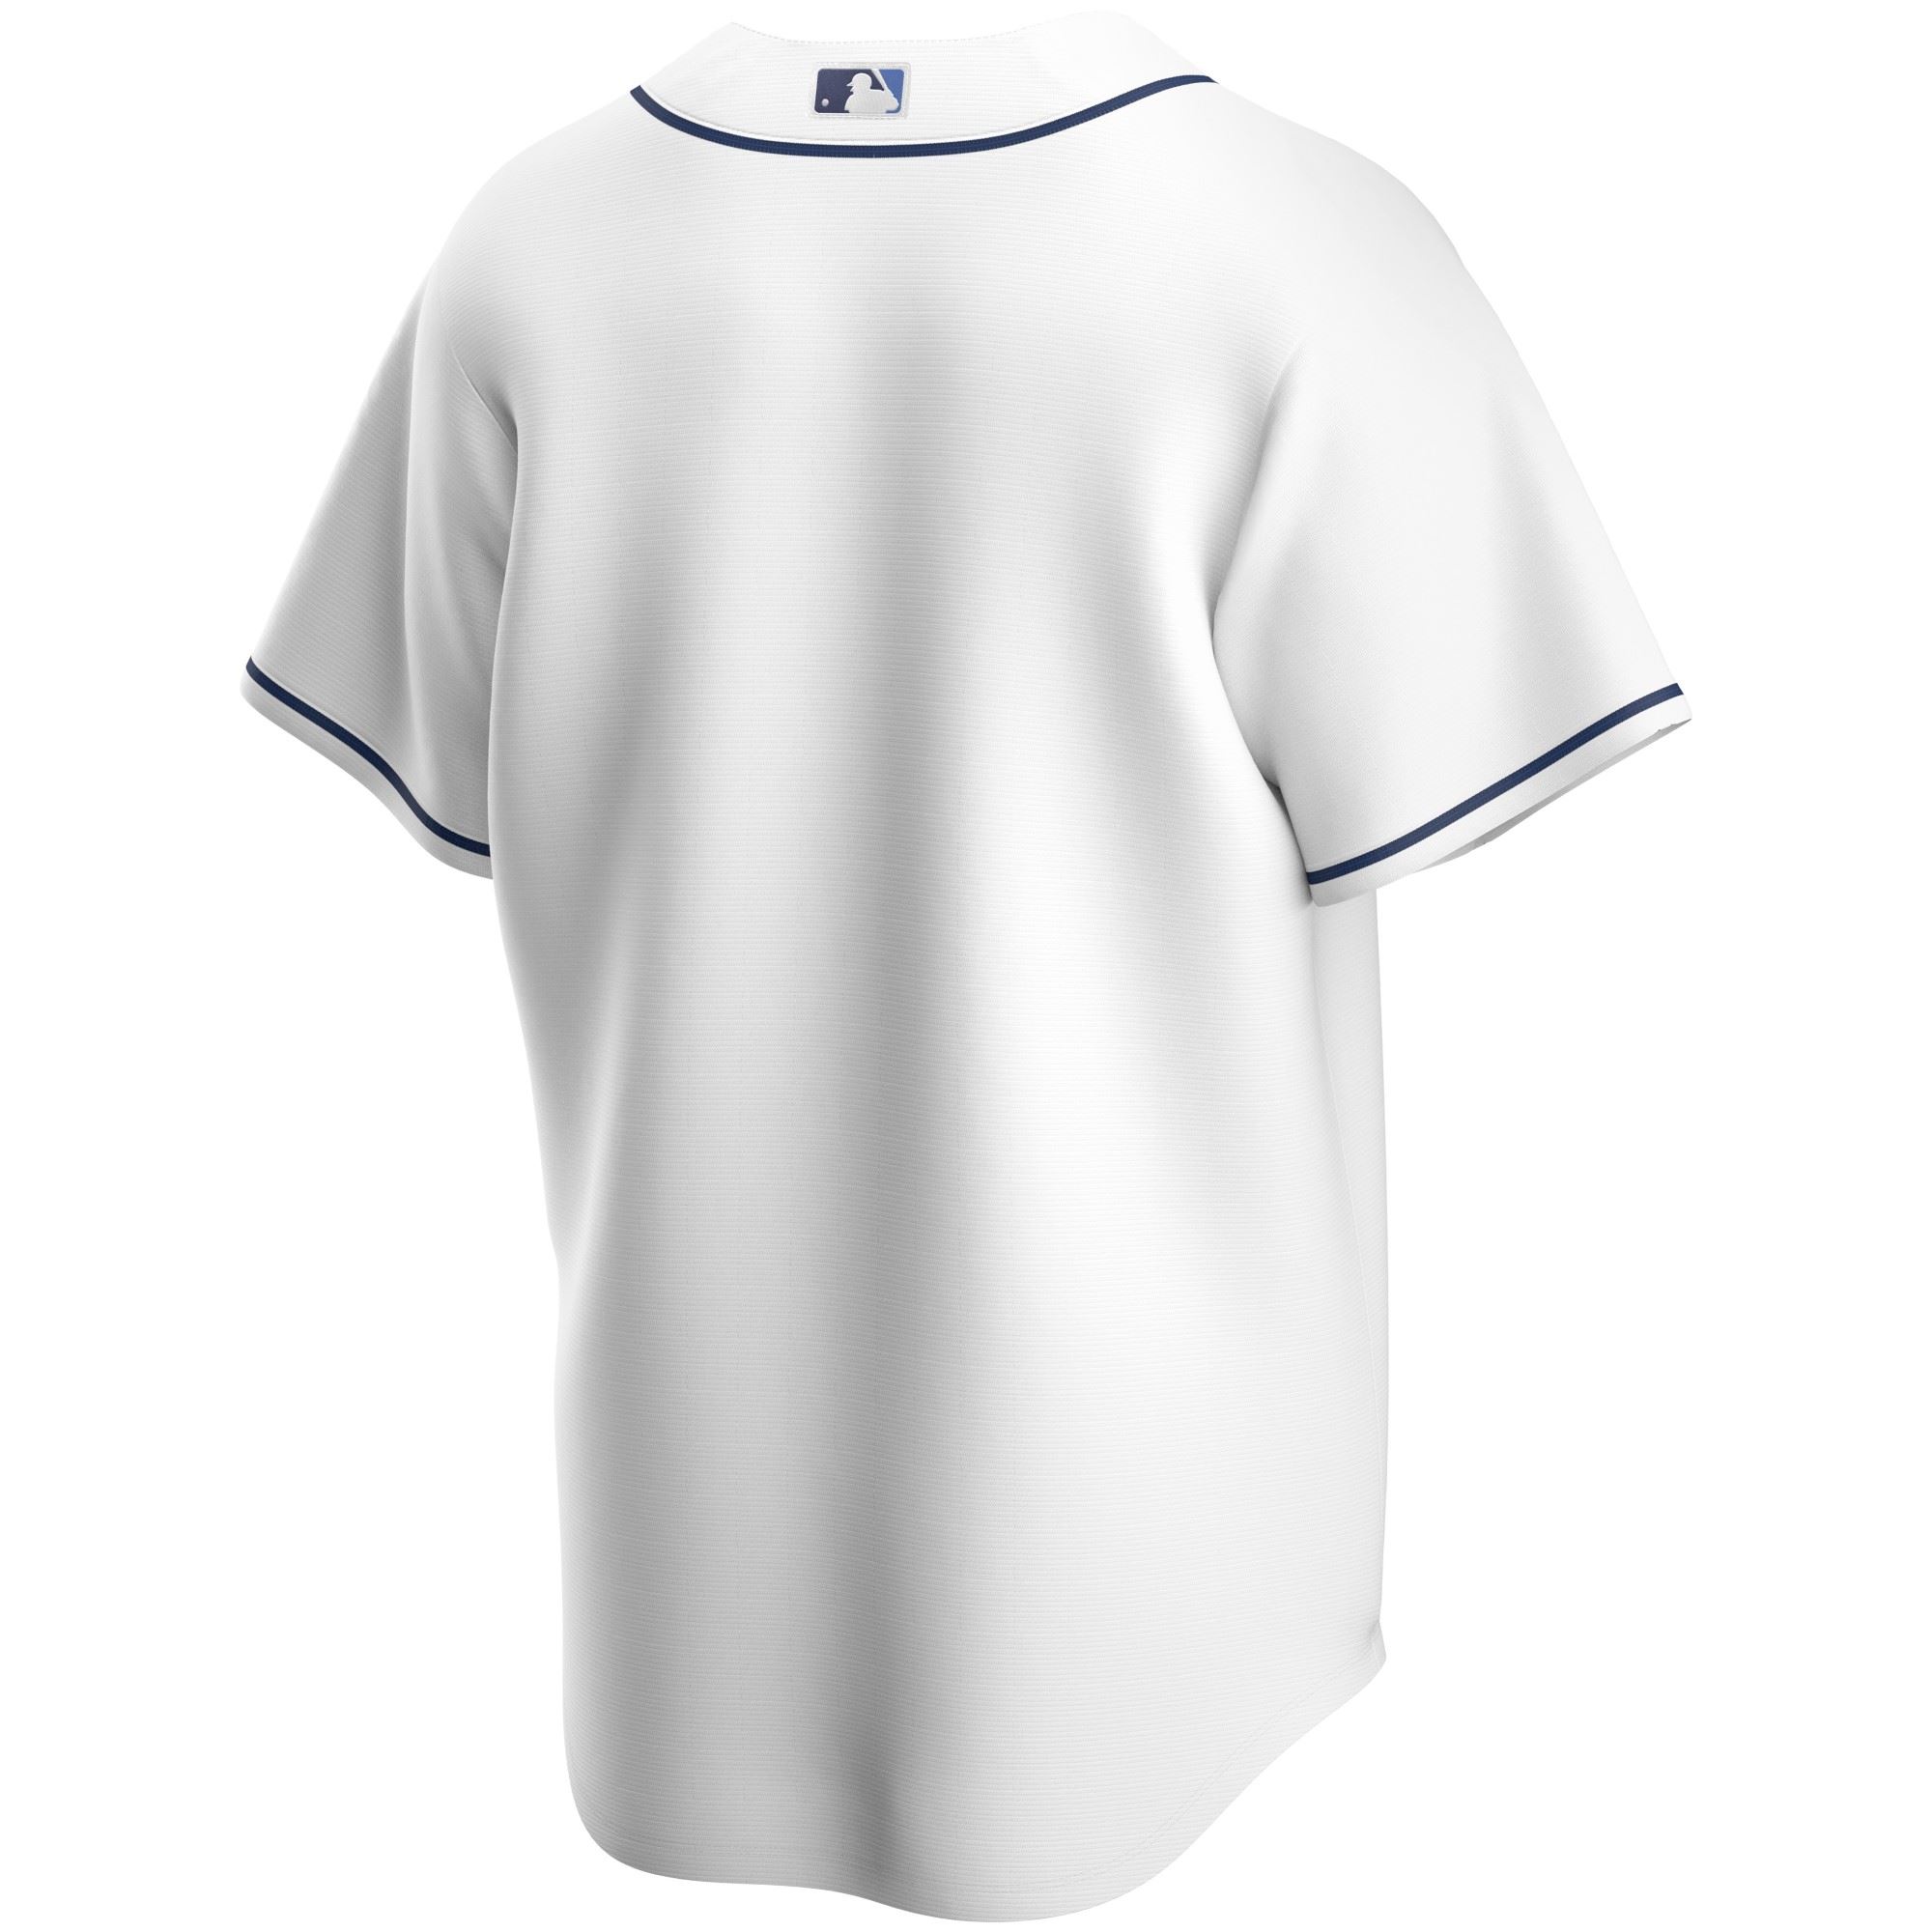 Tampa Bay Rays Official MLB Replica Home Jersey White Nike